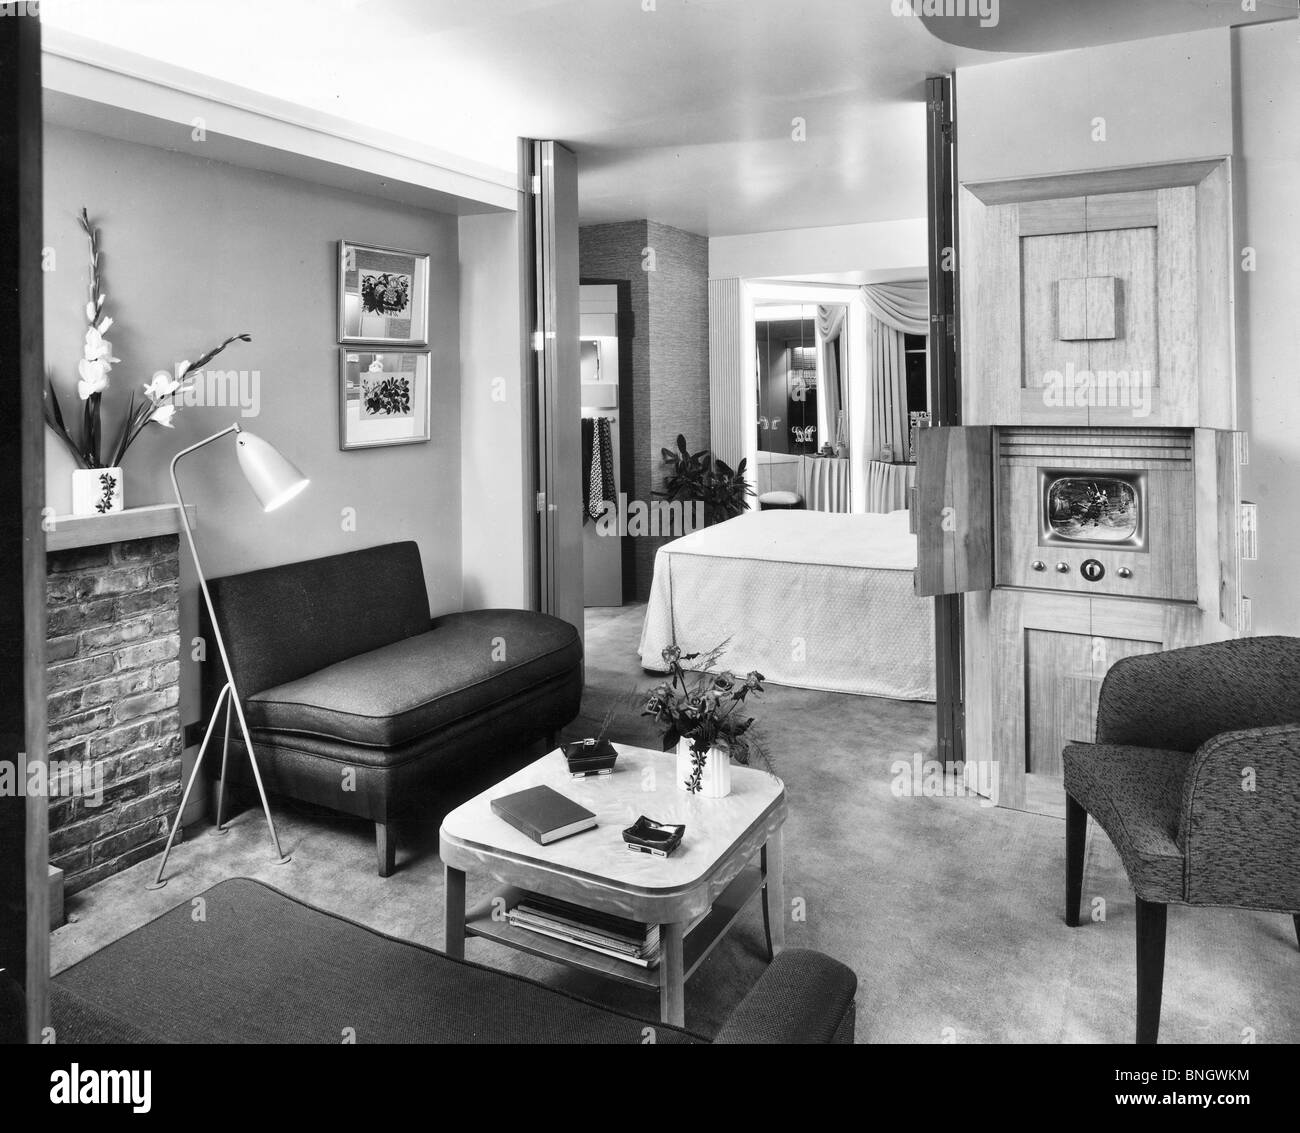 Interior of a living room, 1950s style Stock Photo